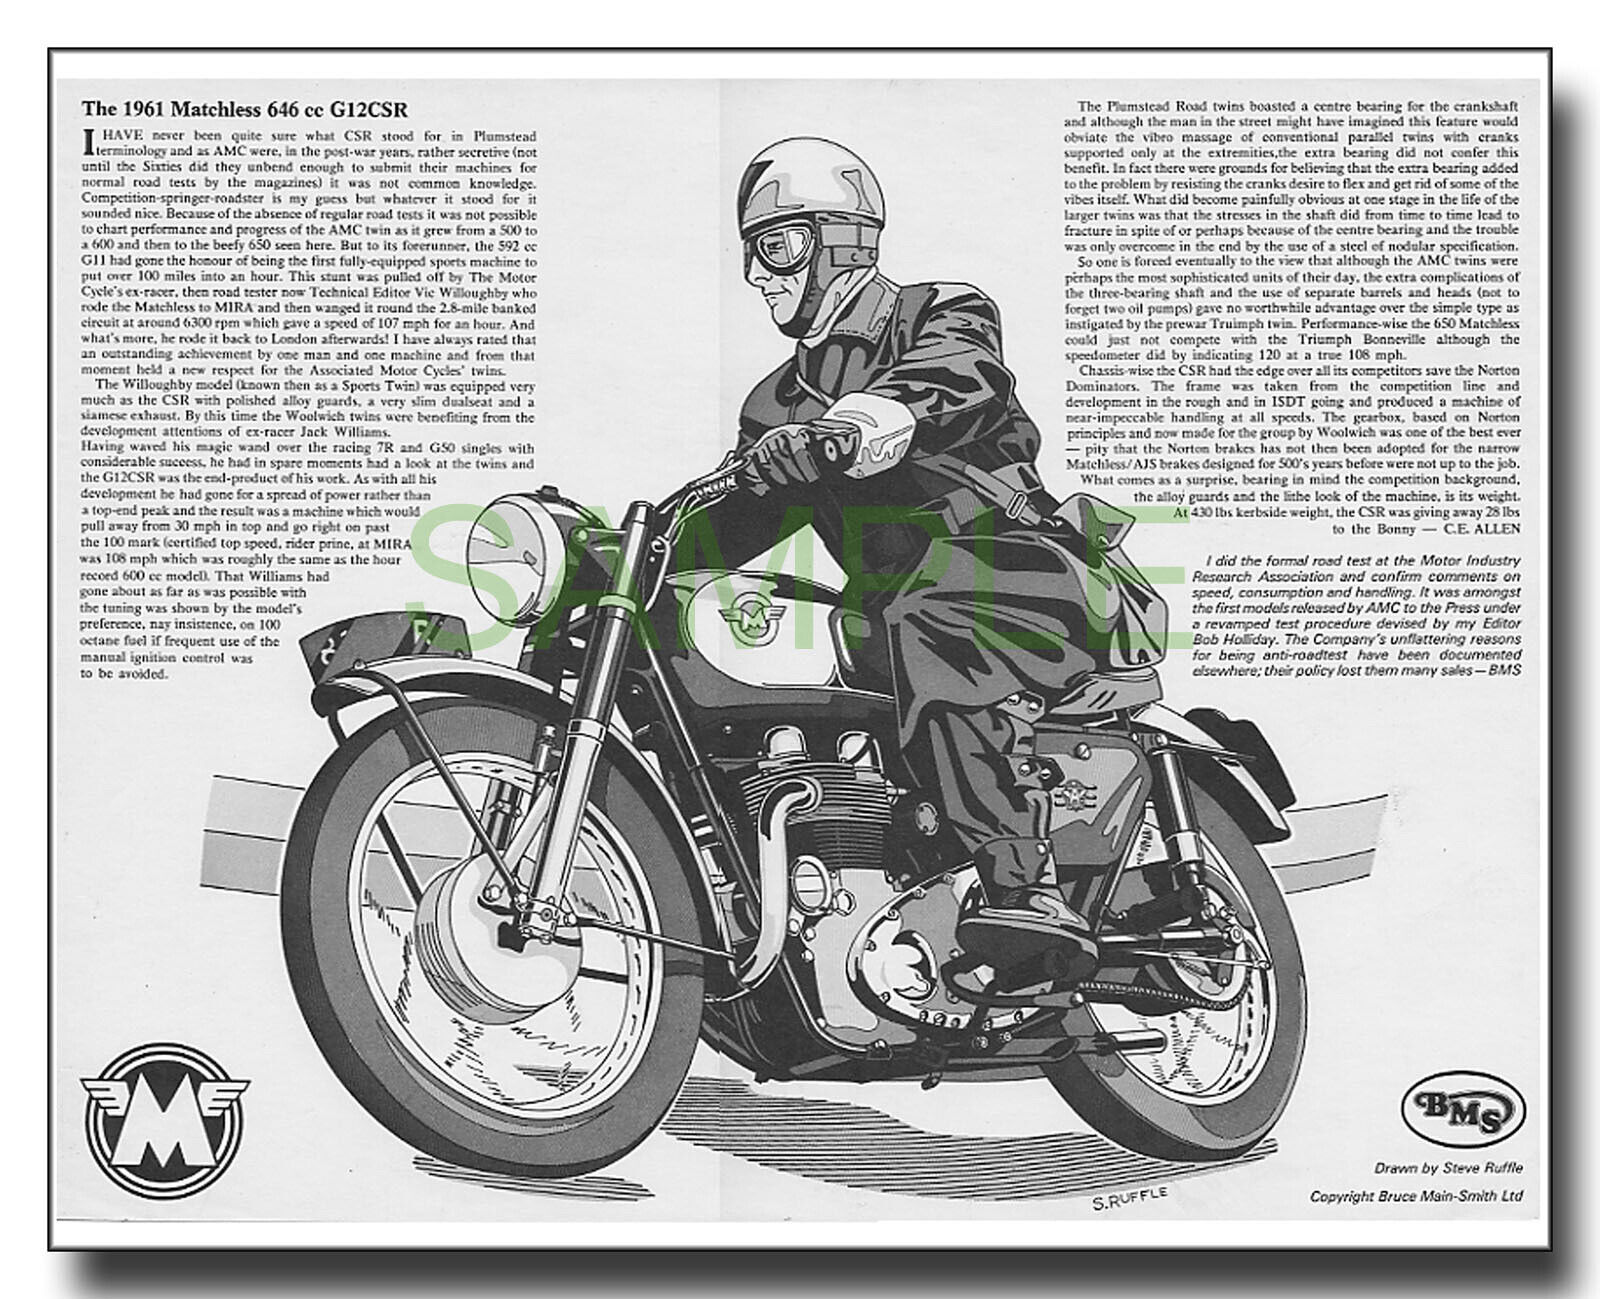 Matchless G12CSR 646cc twin AMC Plumstead 1961 framed BMS picture free p&p UK